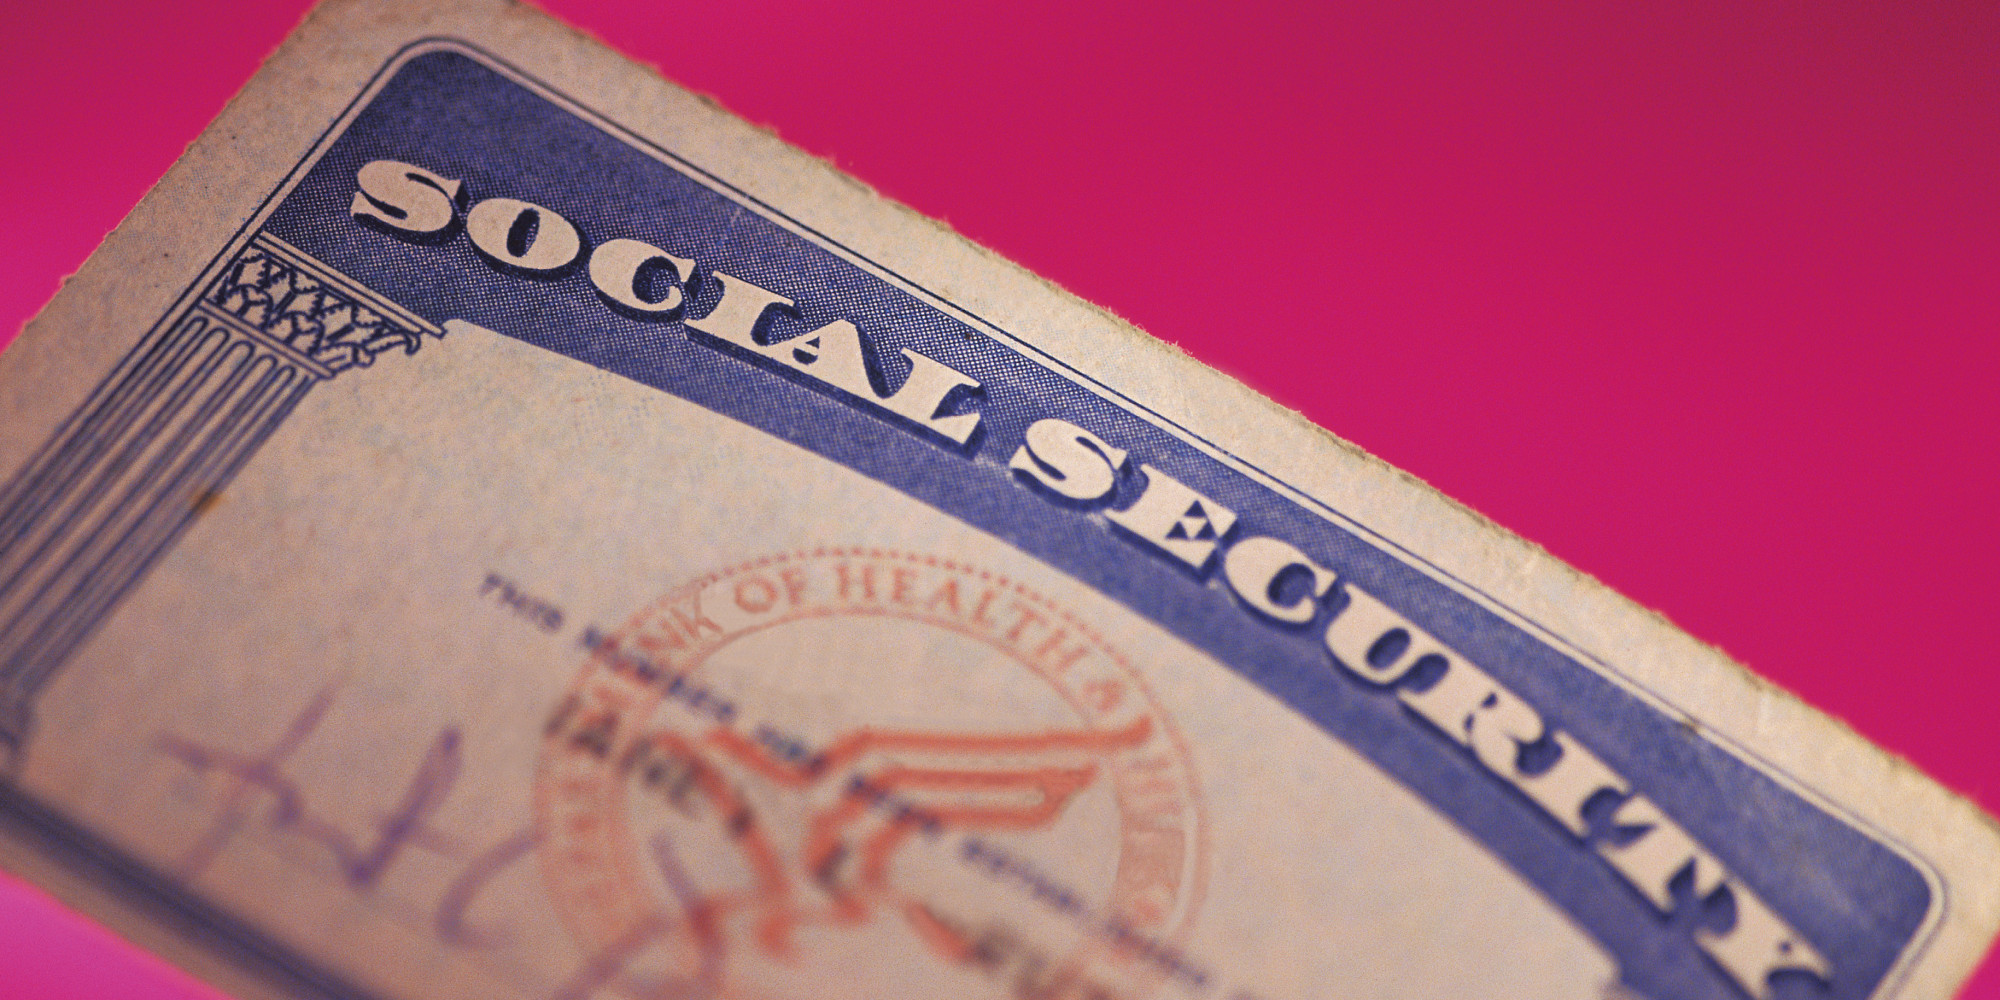 Social Security At 80 Lessons Learned HuffPost